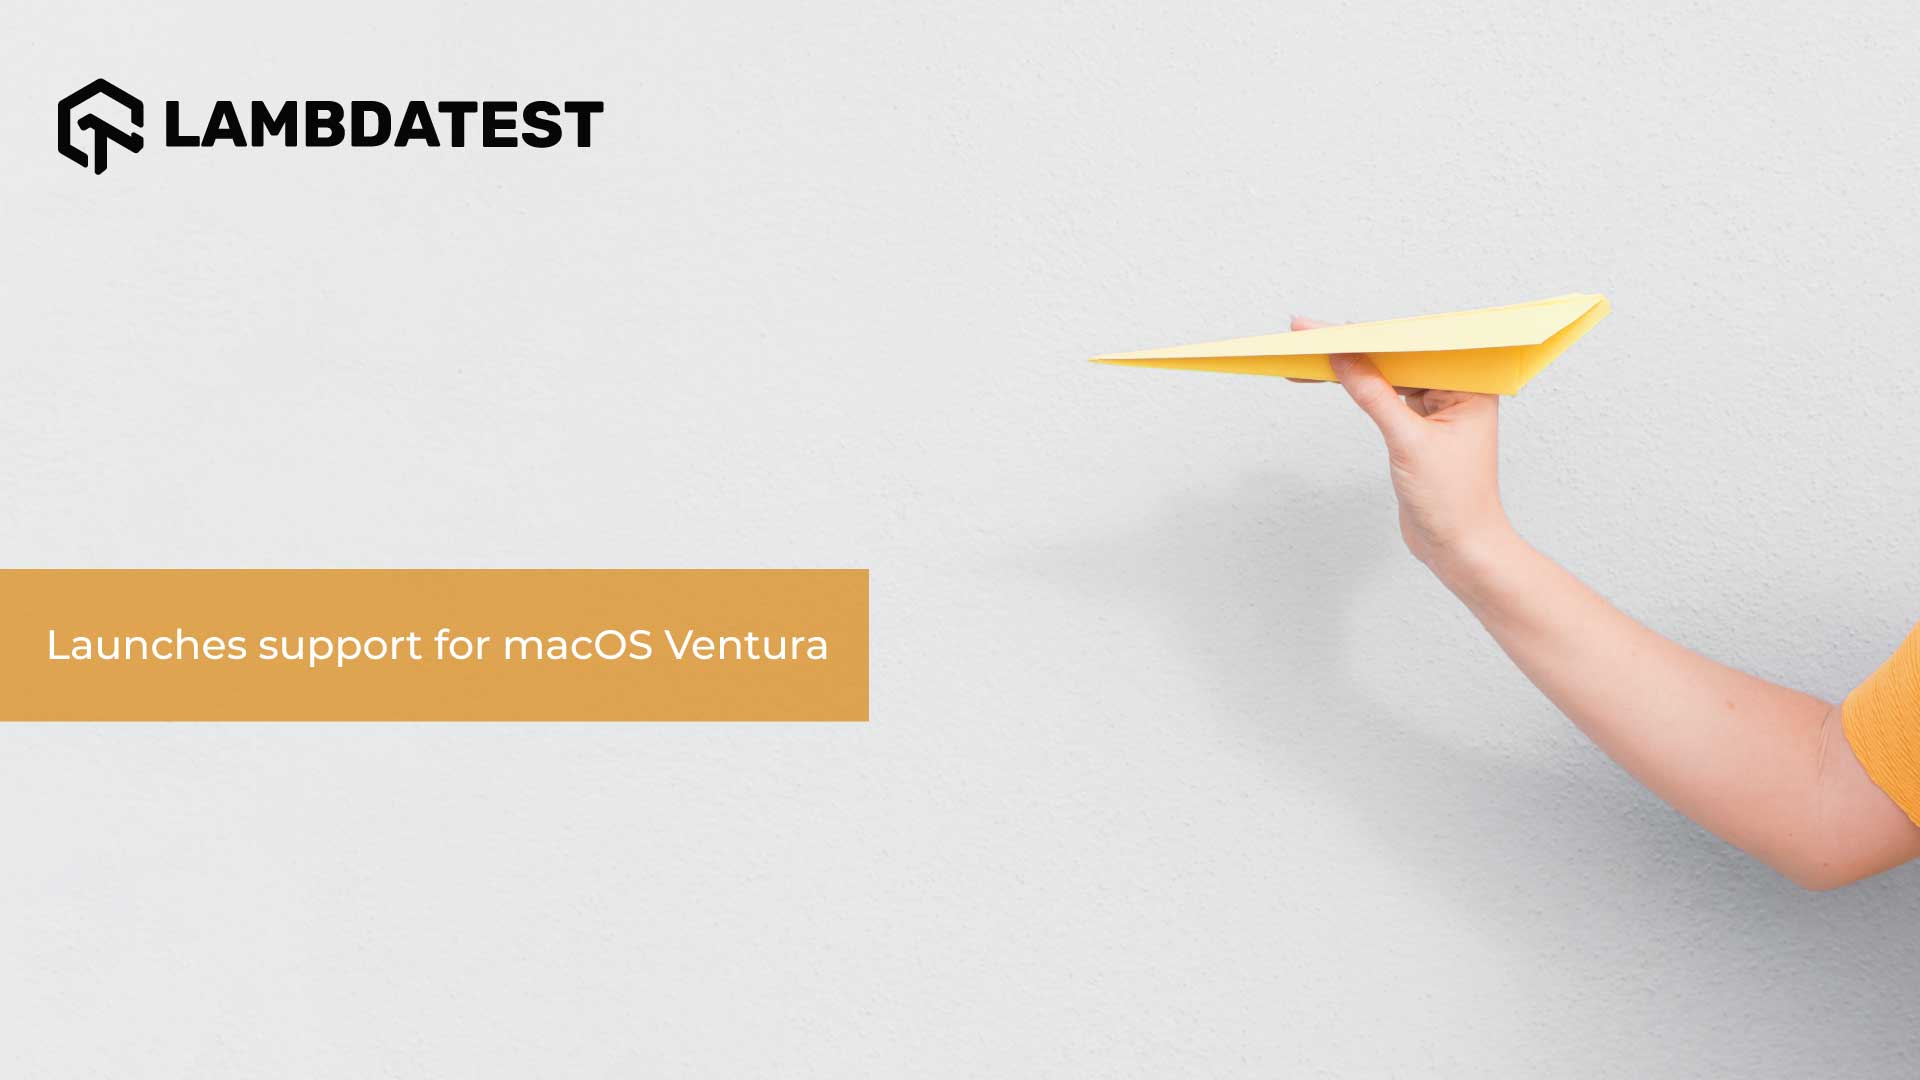 LambdaTest launches support for macOS Ventura on its continuous testing platform on the cloud